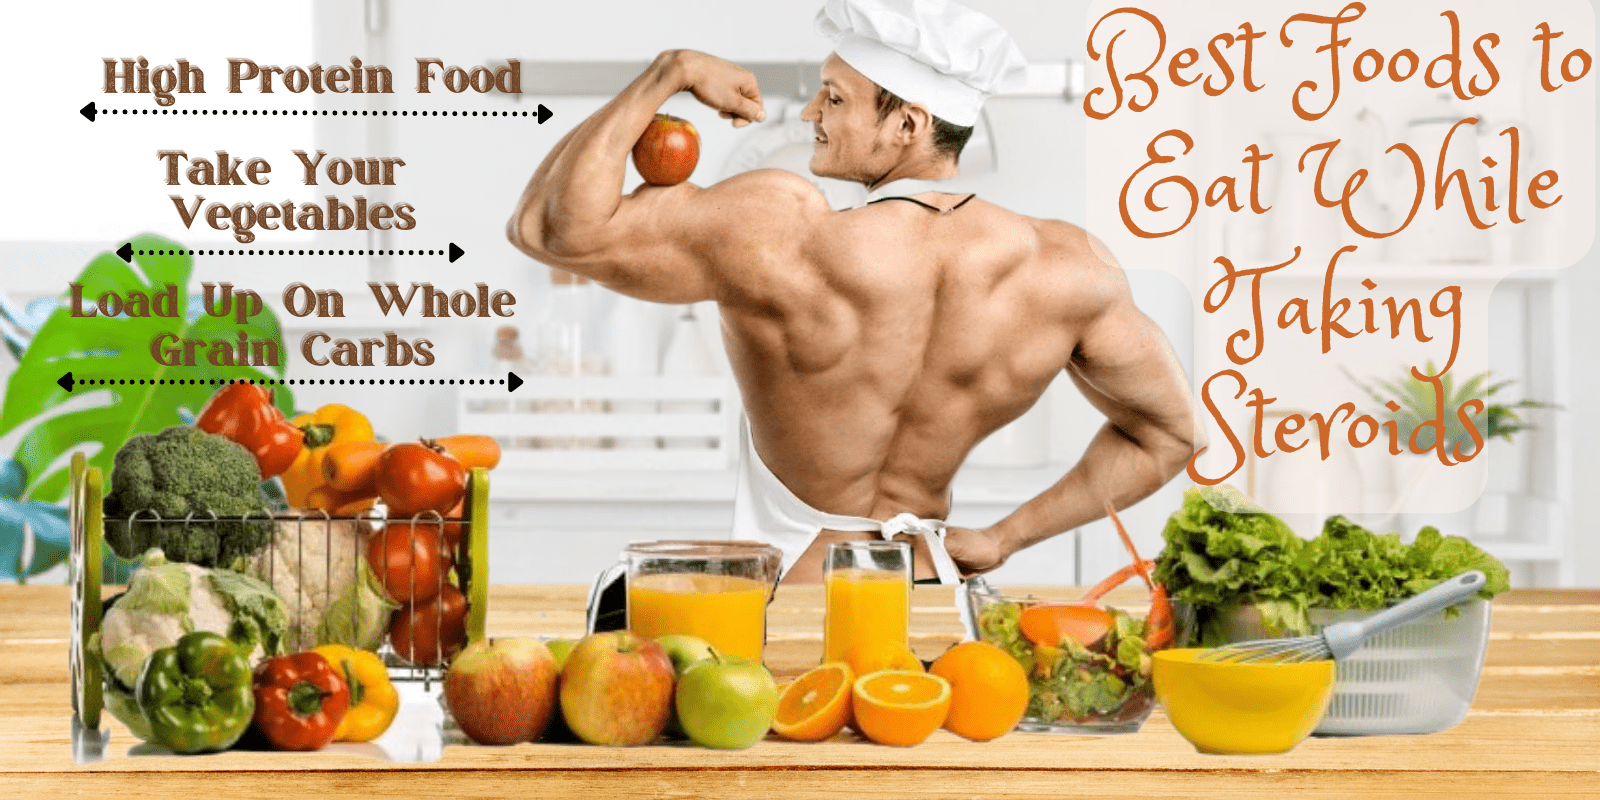 Best Foods to Eat While Taking Steroids